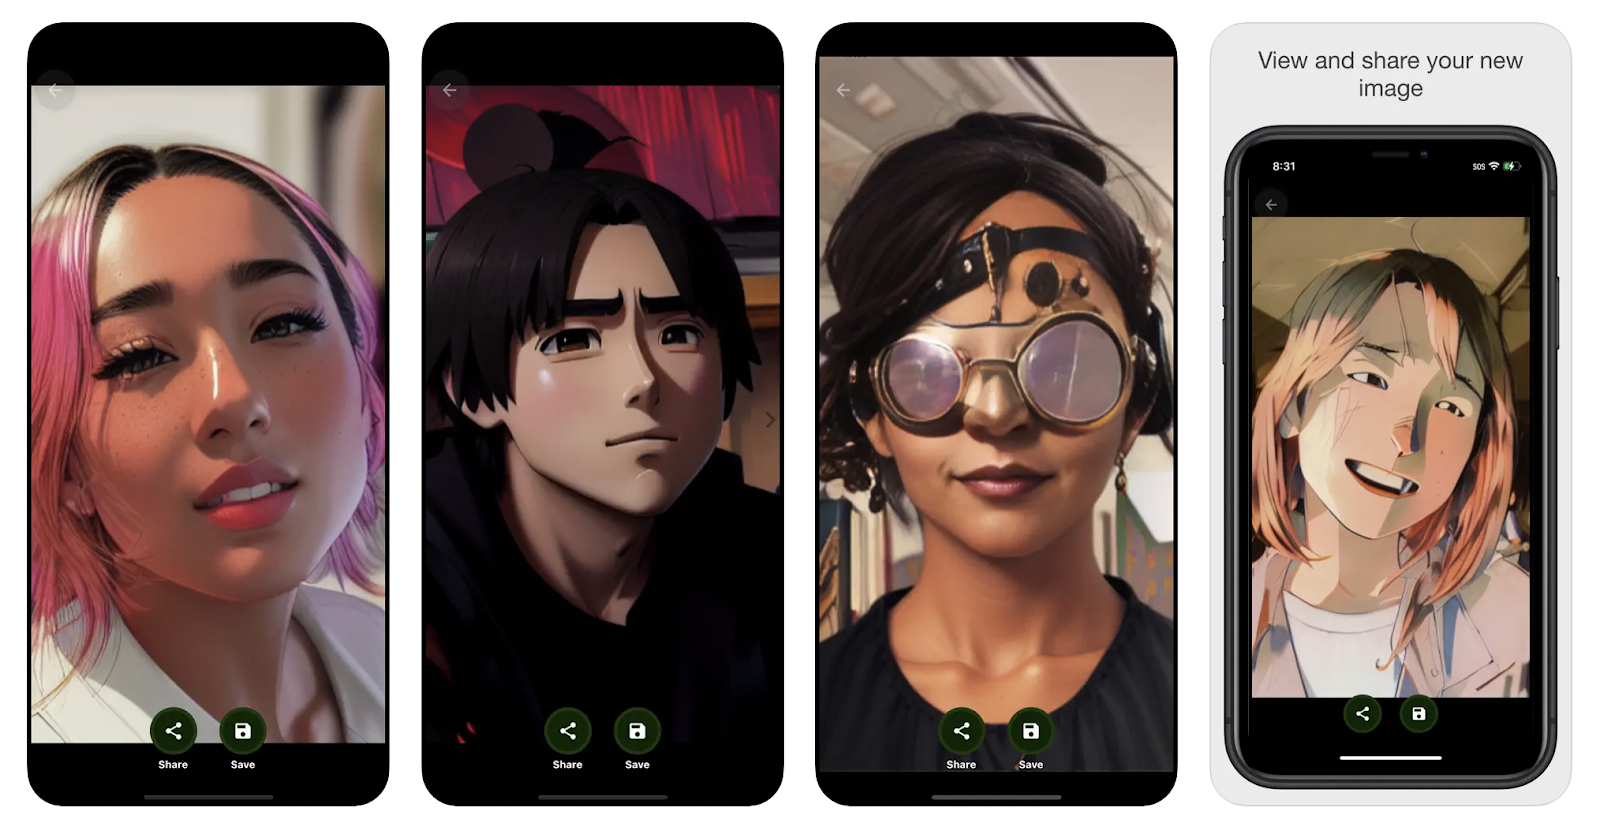 Four selfes with filters applied to make them look like they are from an anime.